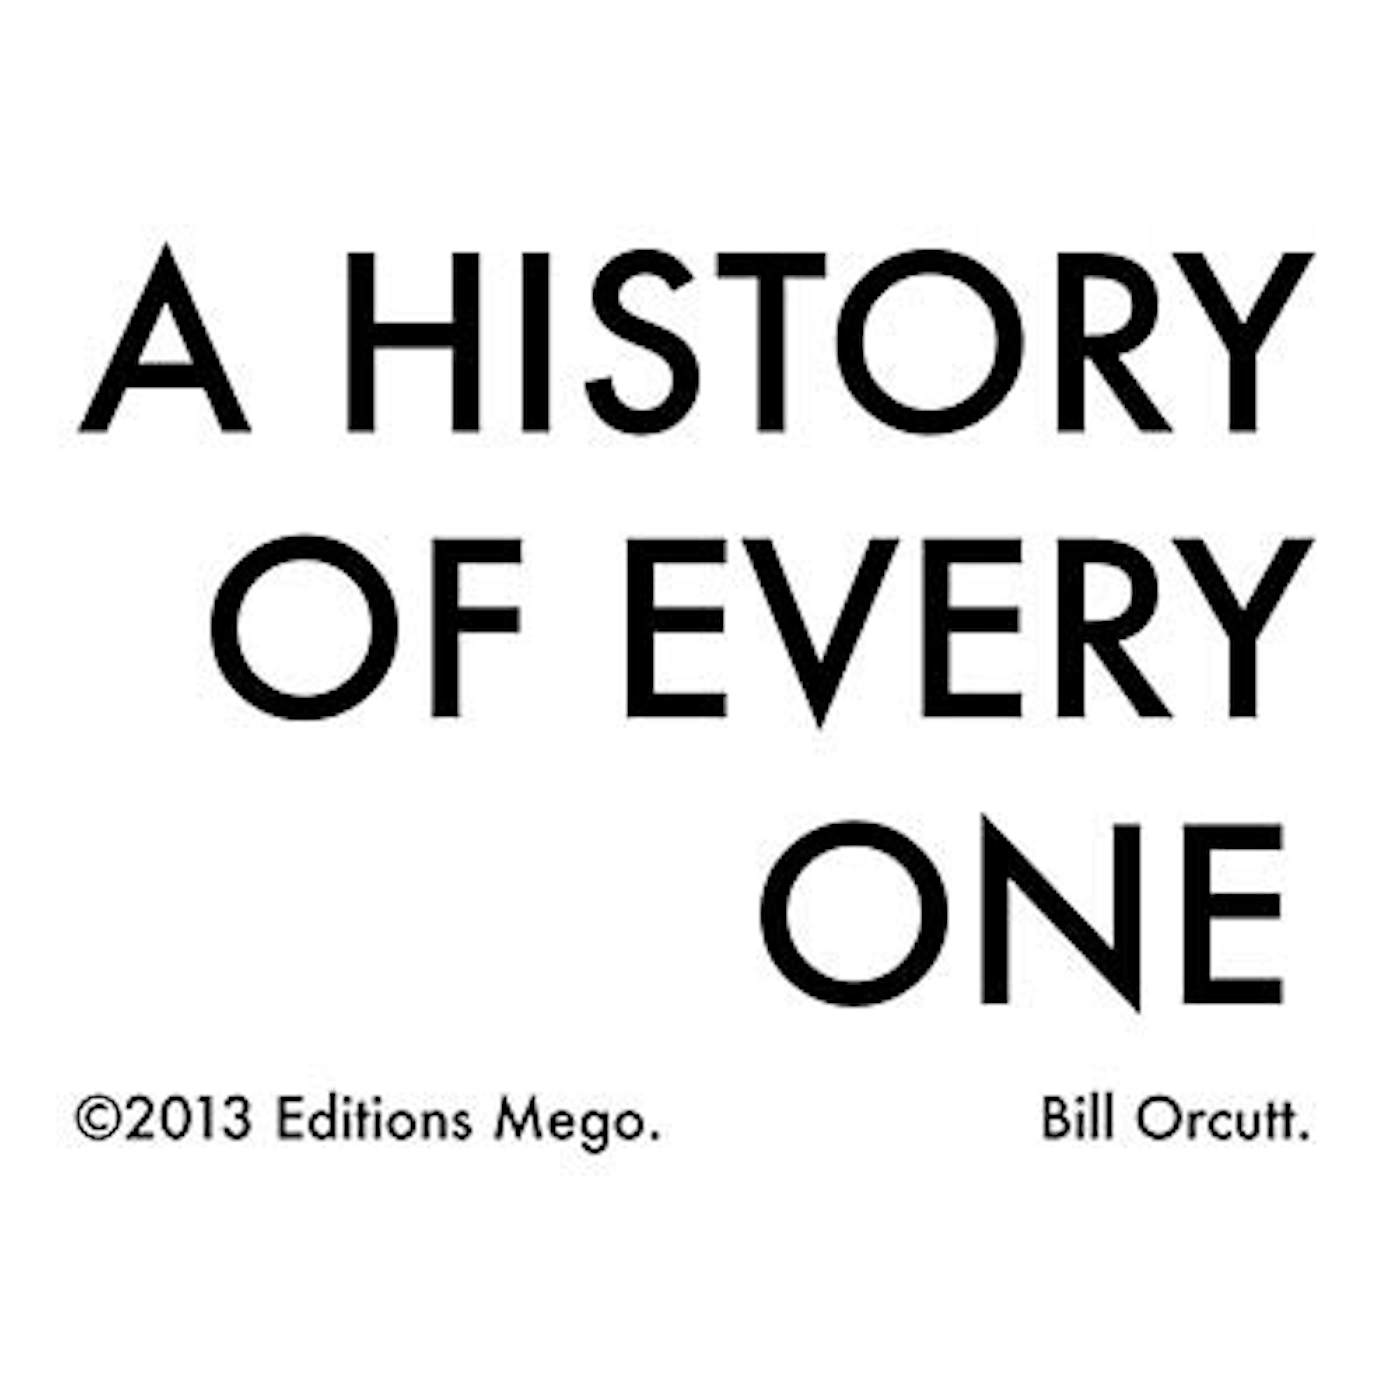 Bill Orcutt HISTORY OF EVERY ONE Vinyl Record